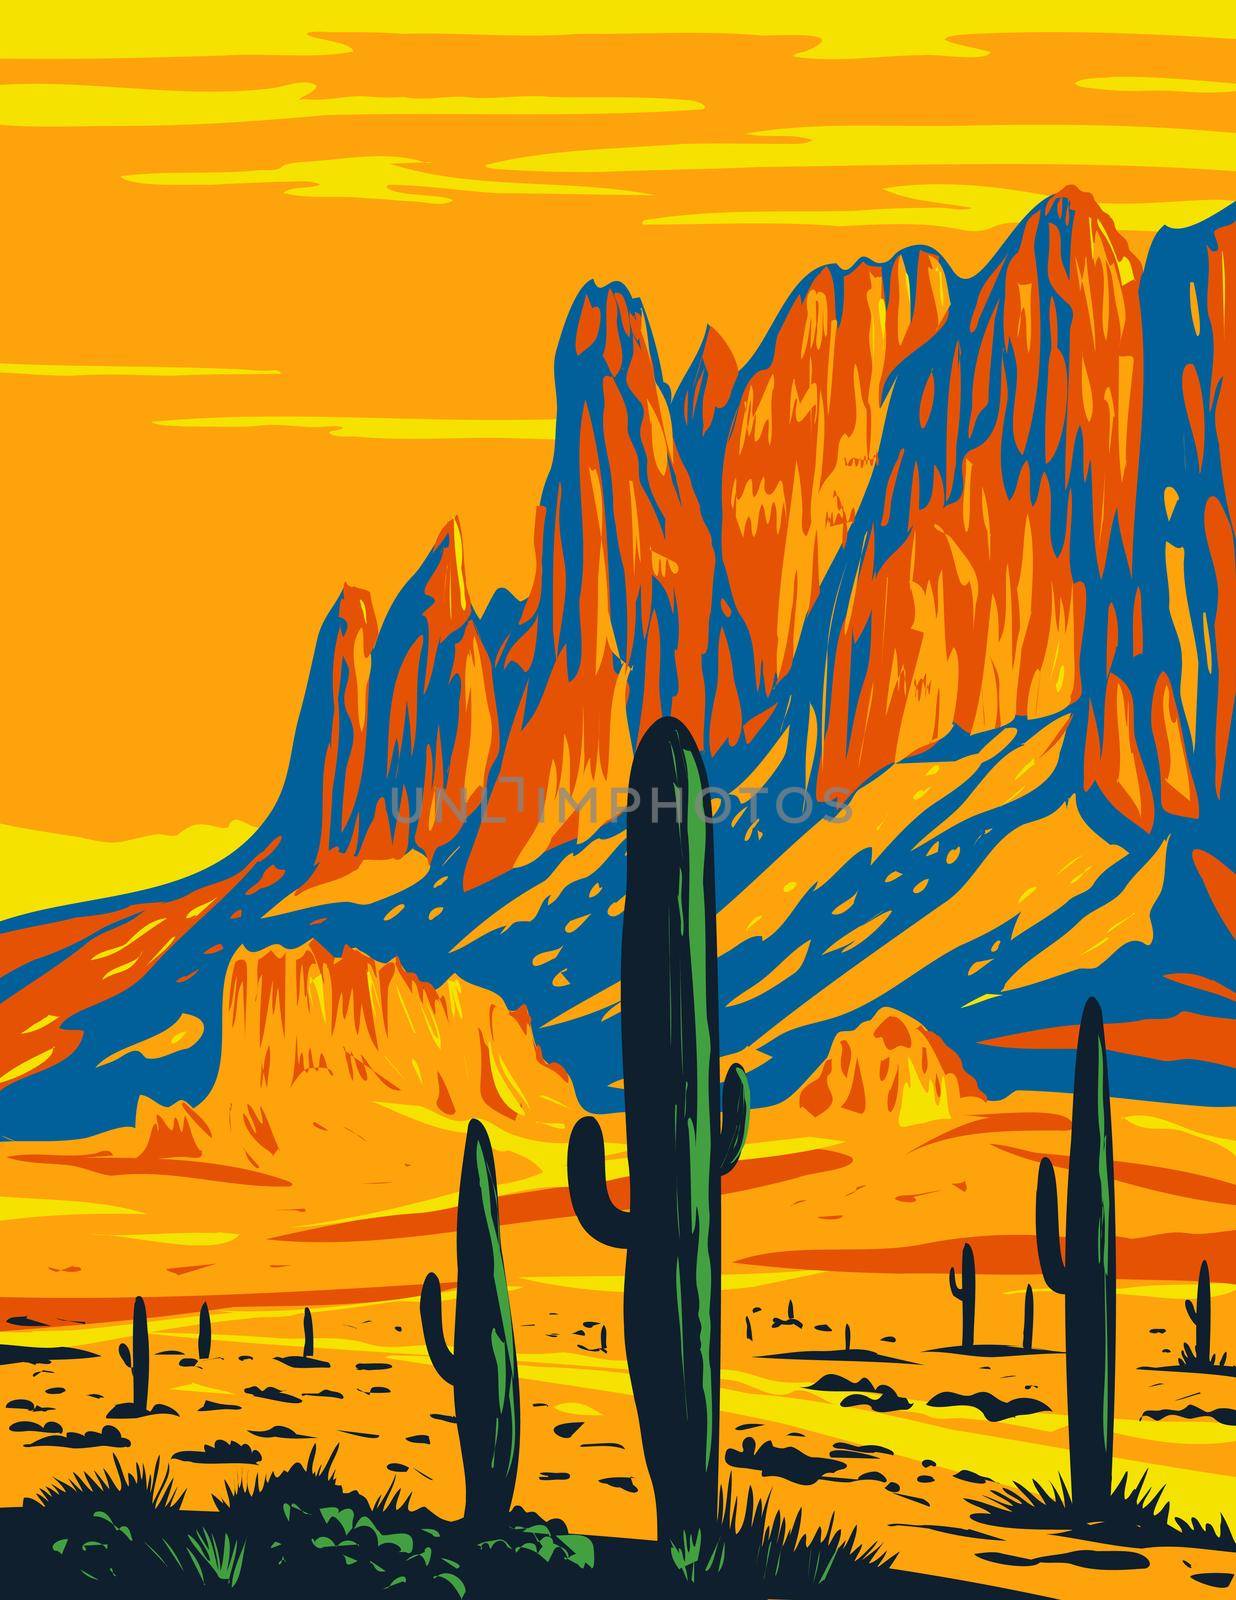 WPA poster art of Lost Dutchman State Park showing Flat Iron in the Superstition Mountains located in Arizona, United States of America USA done in works project administration style.